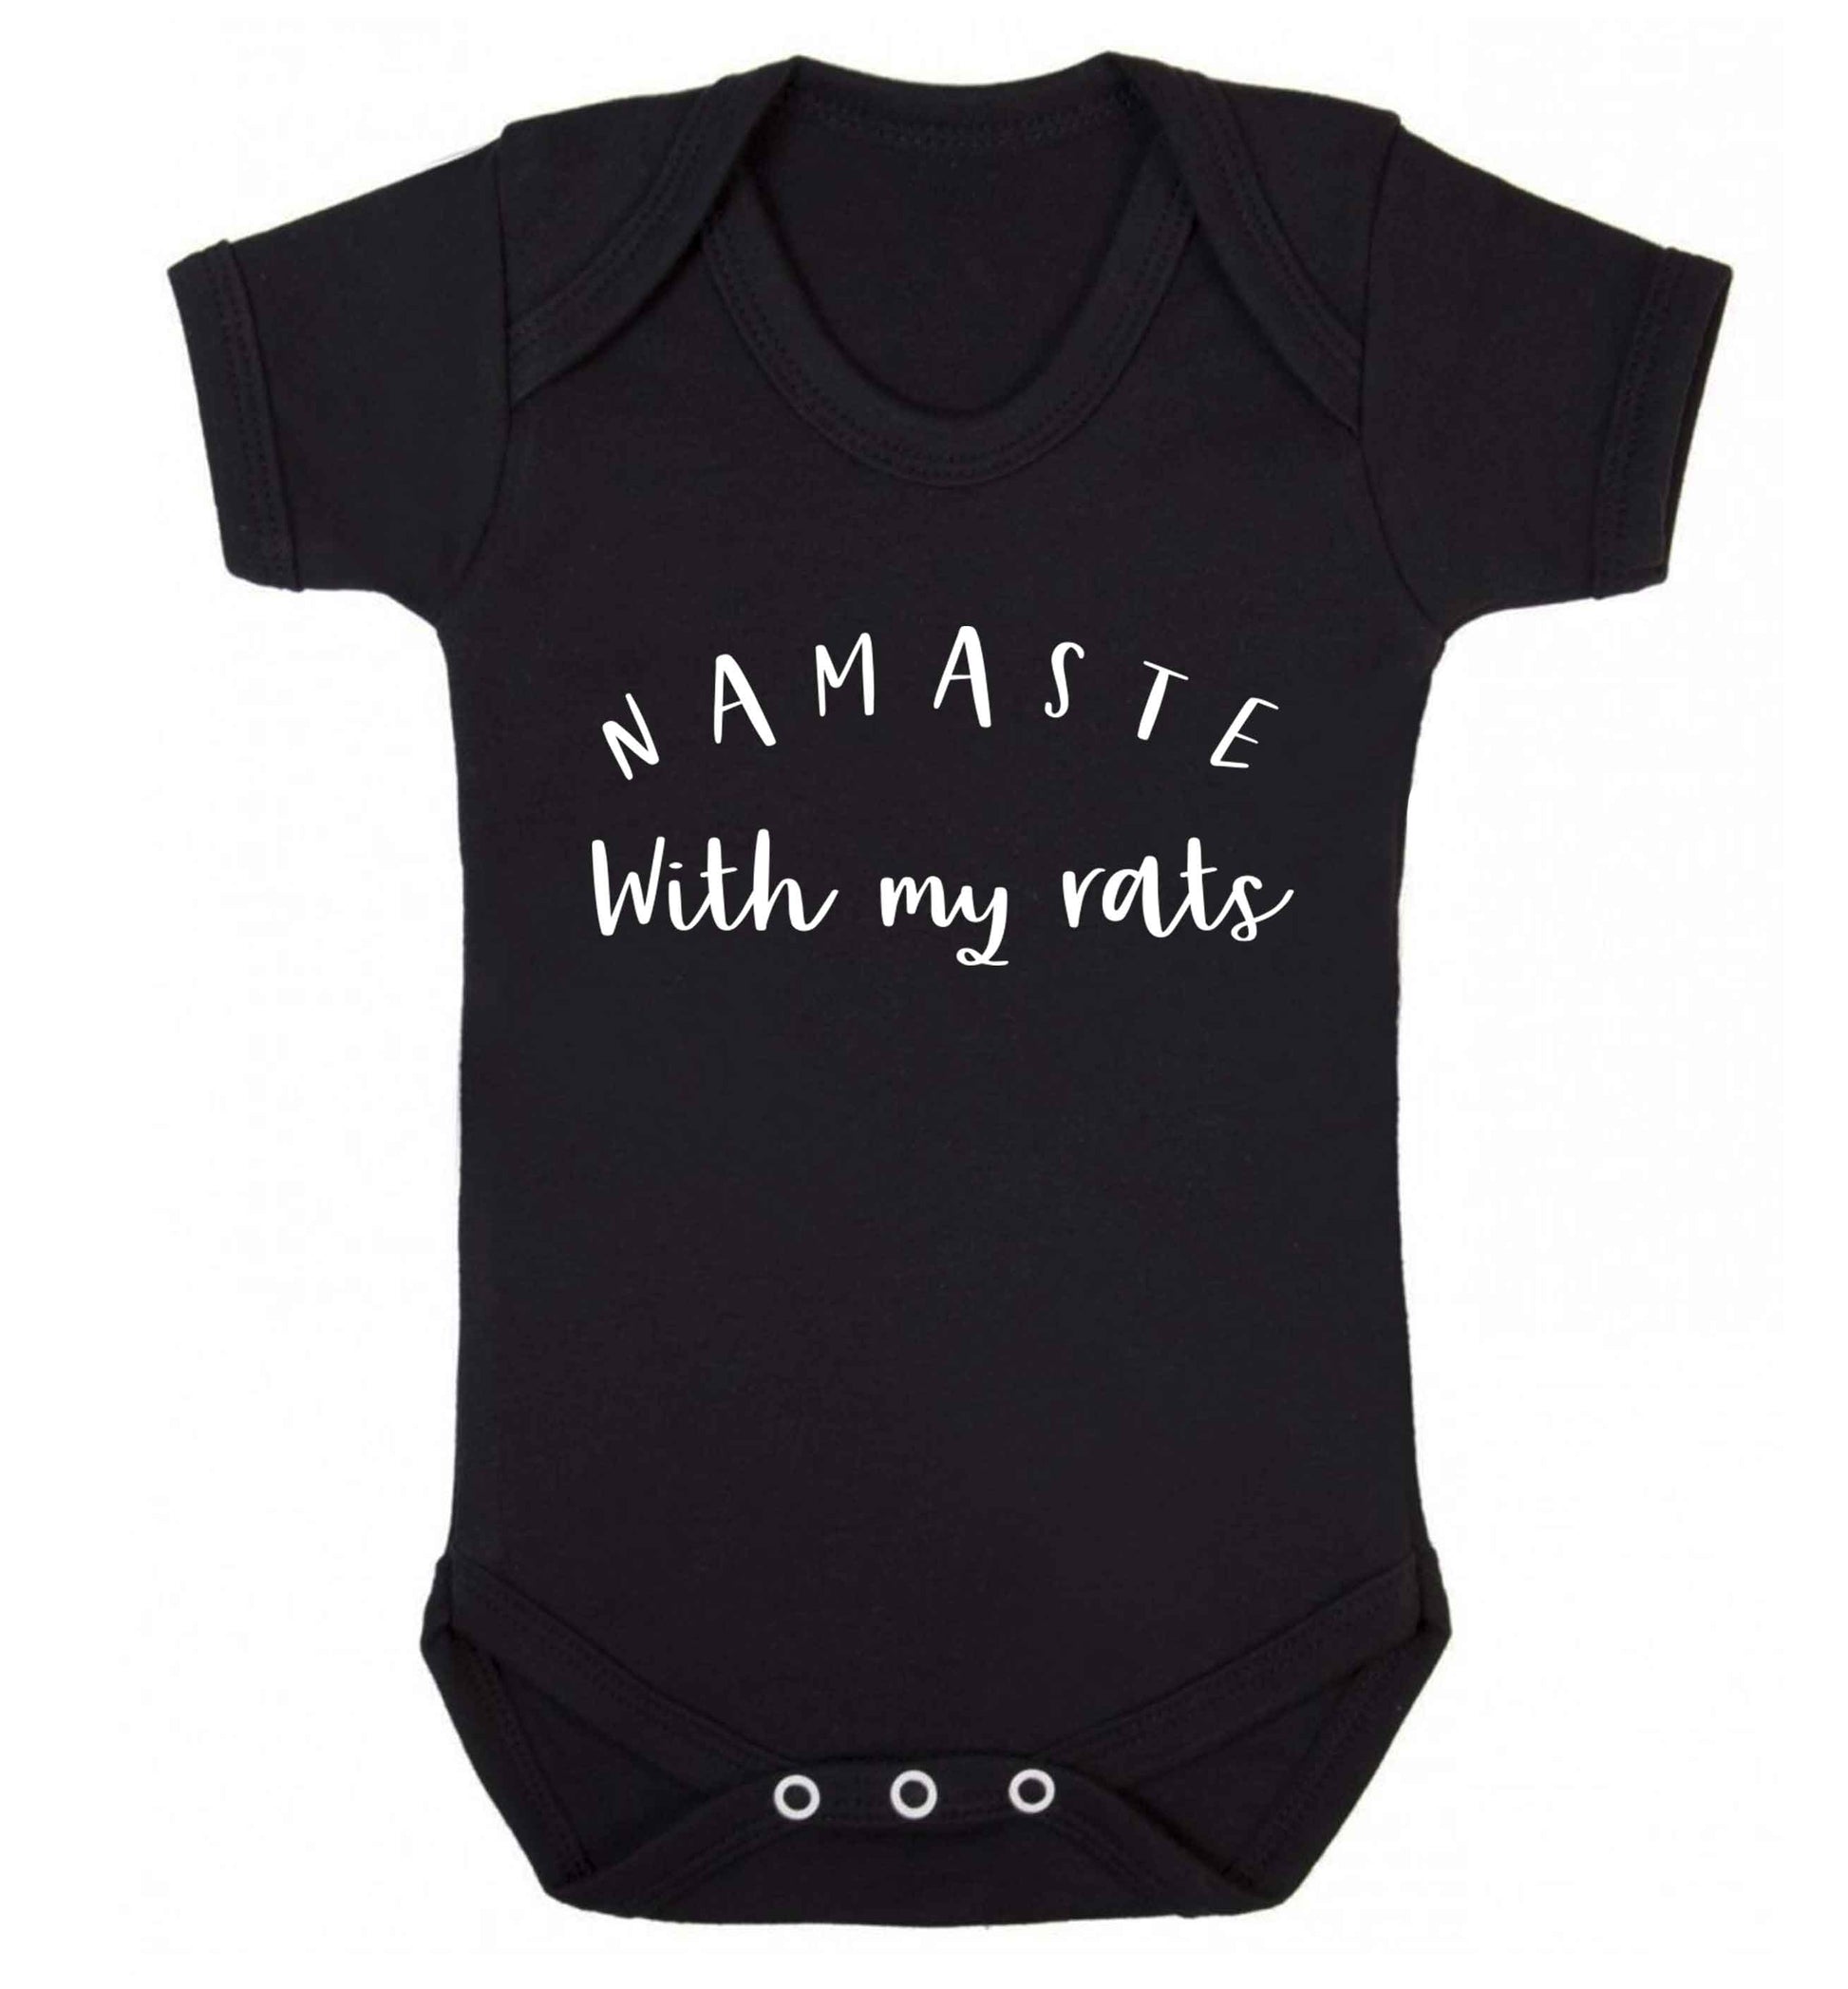 Namaste with my rats Baby Vest black 18-24 months